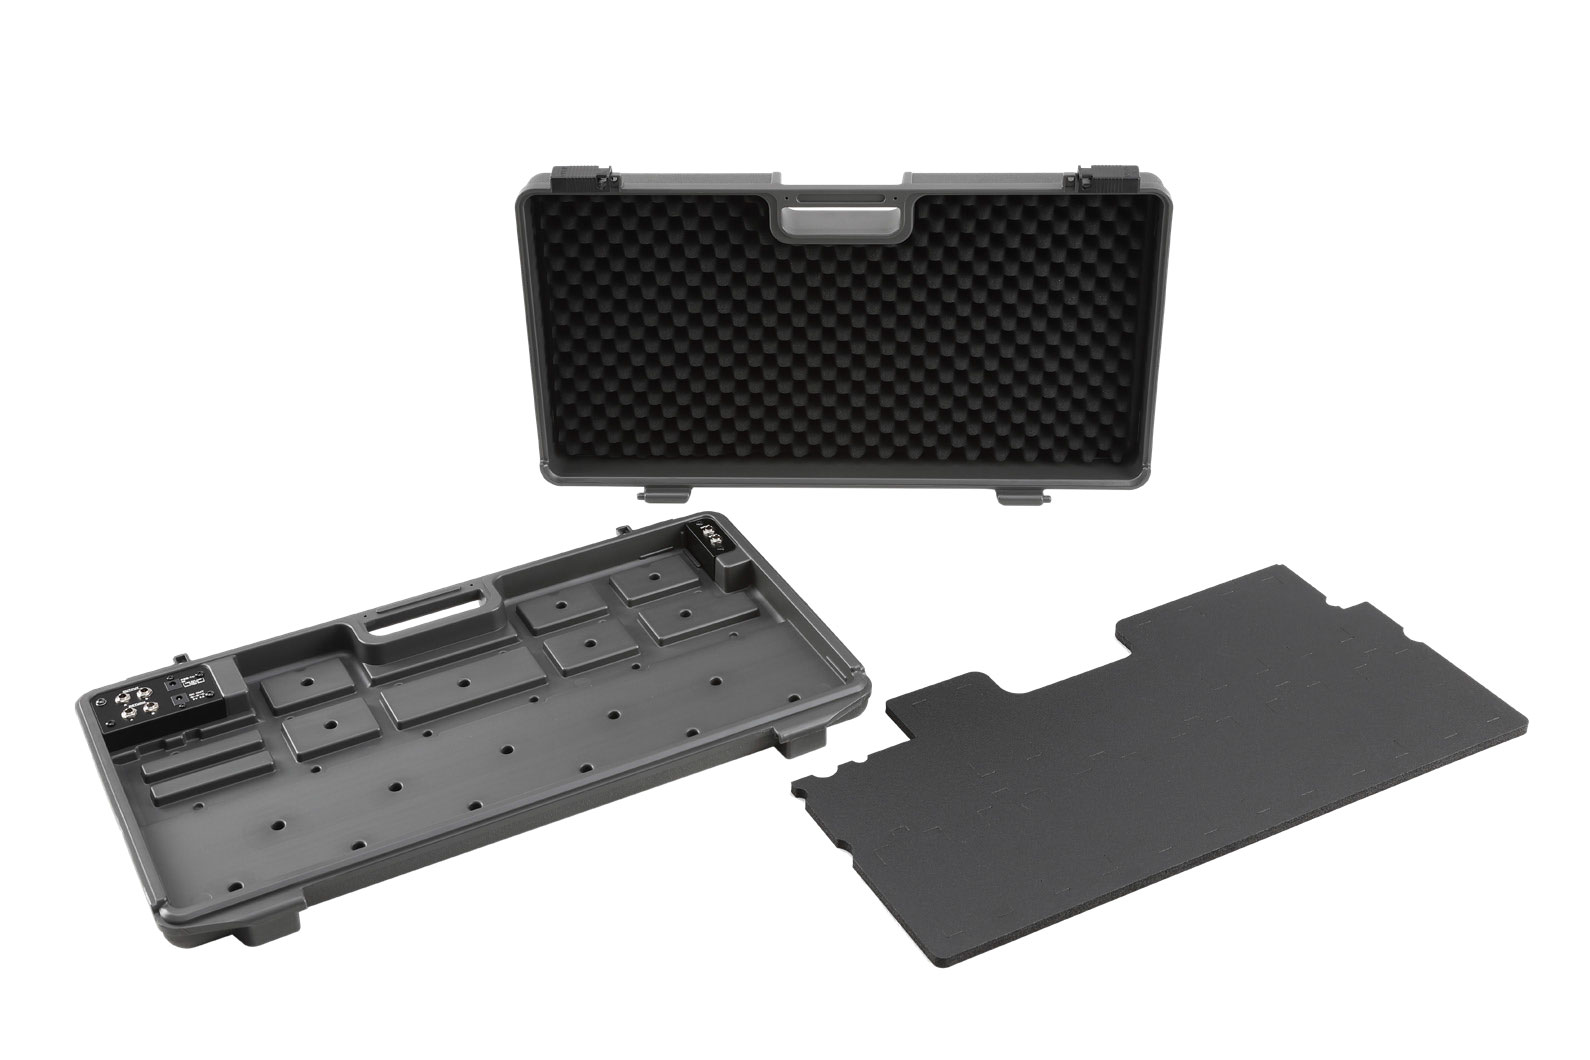 BOSS BCB-90X MOLDED PLASTIC CARRY CASE WITH I/O INTERFACE FOR 9 PEDALS + DAISY CHAIN POWER CABLE